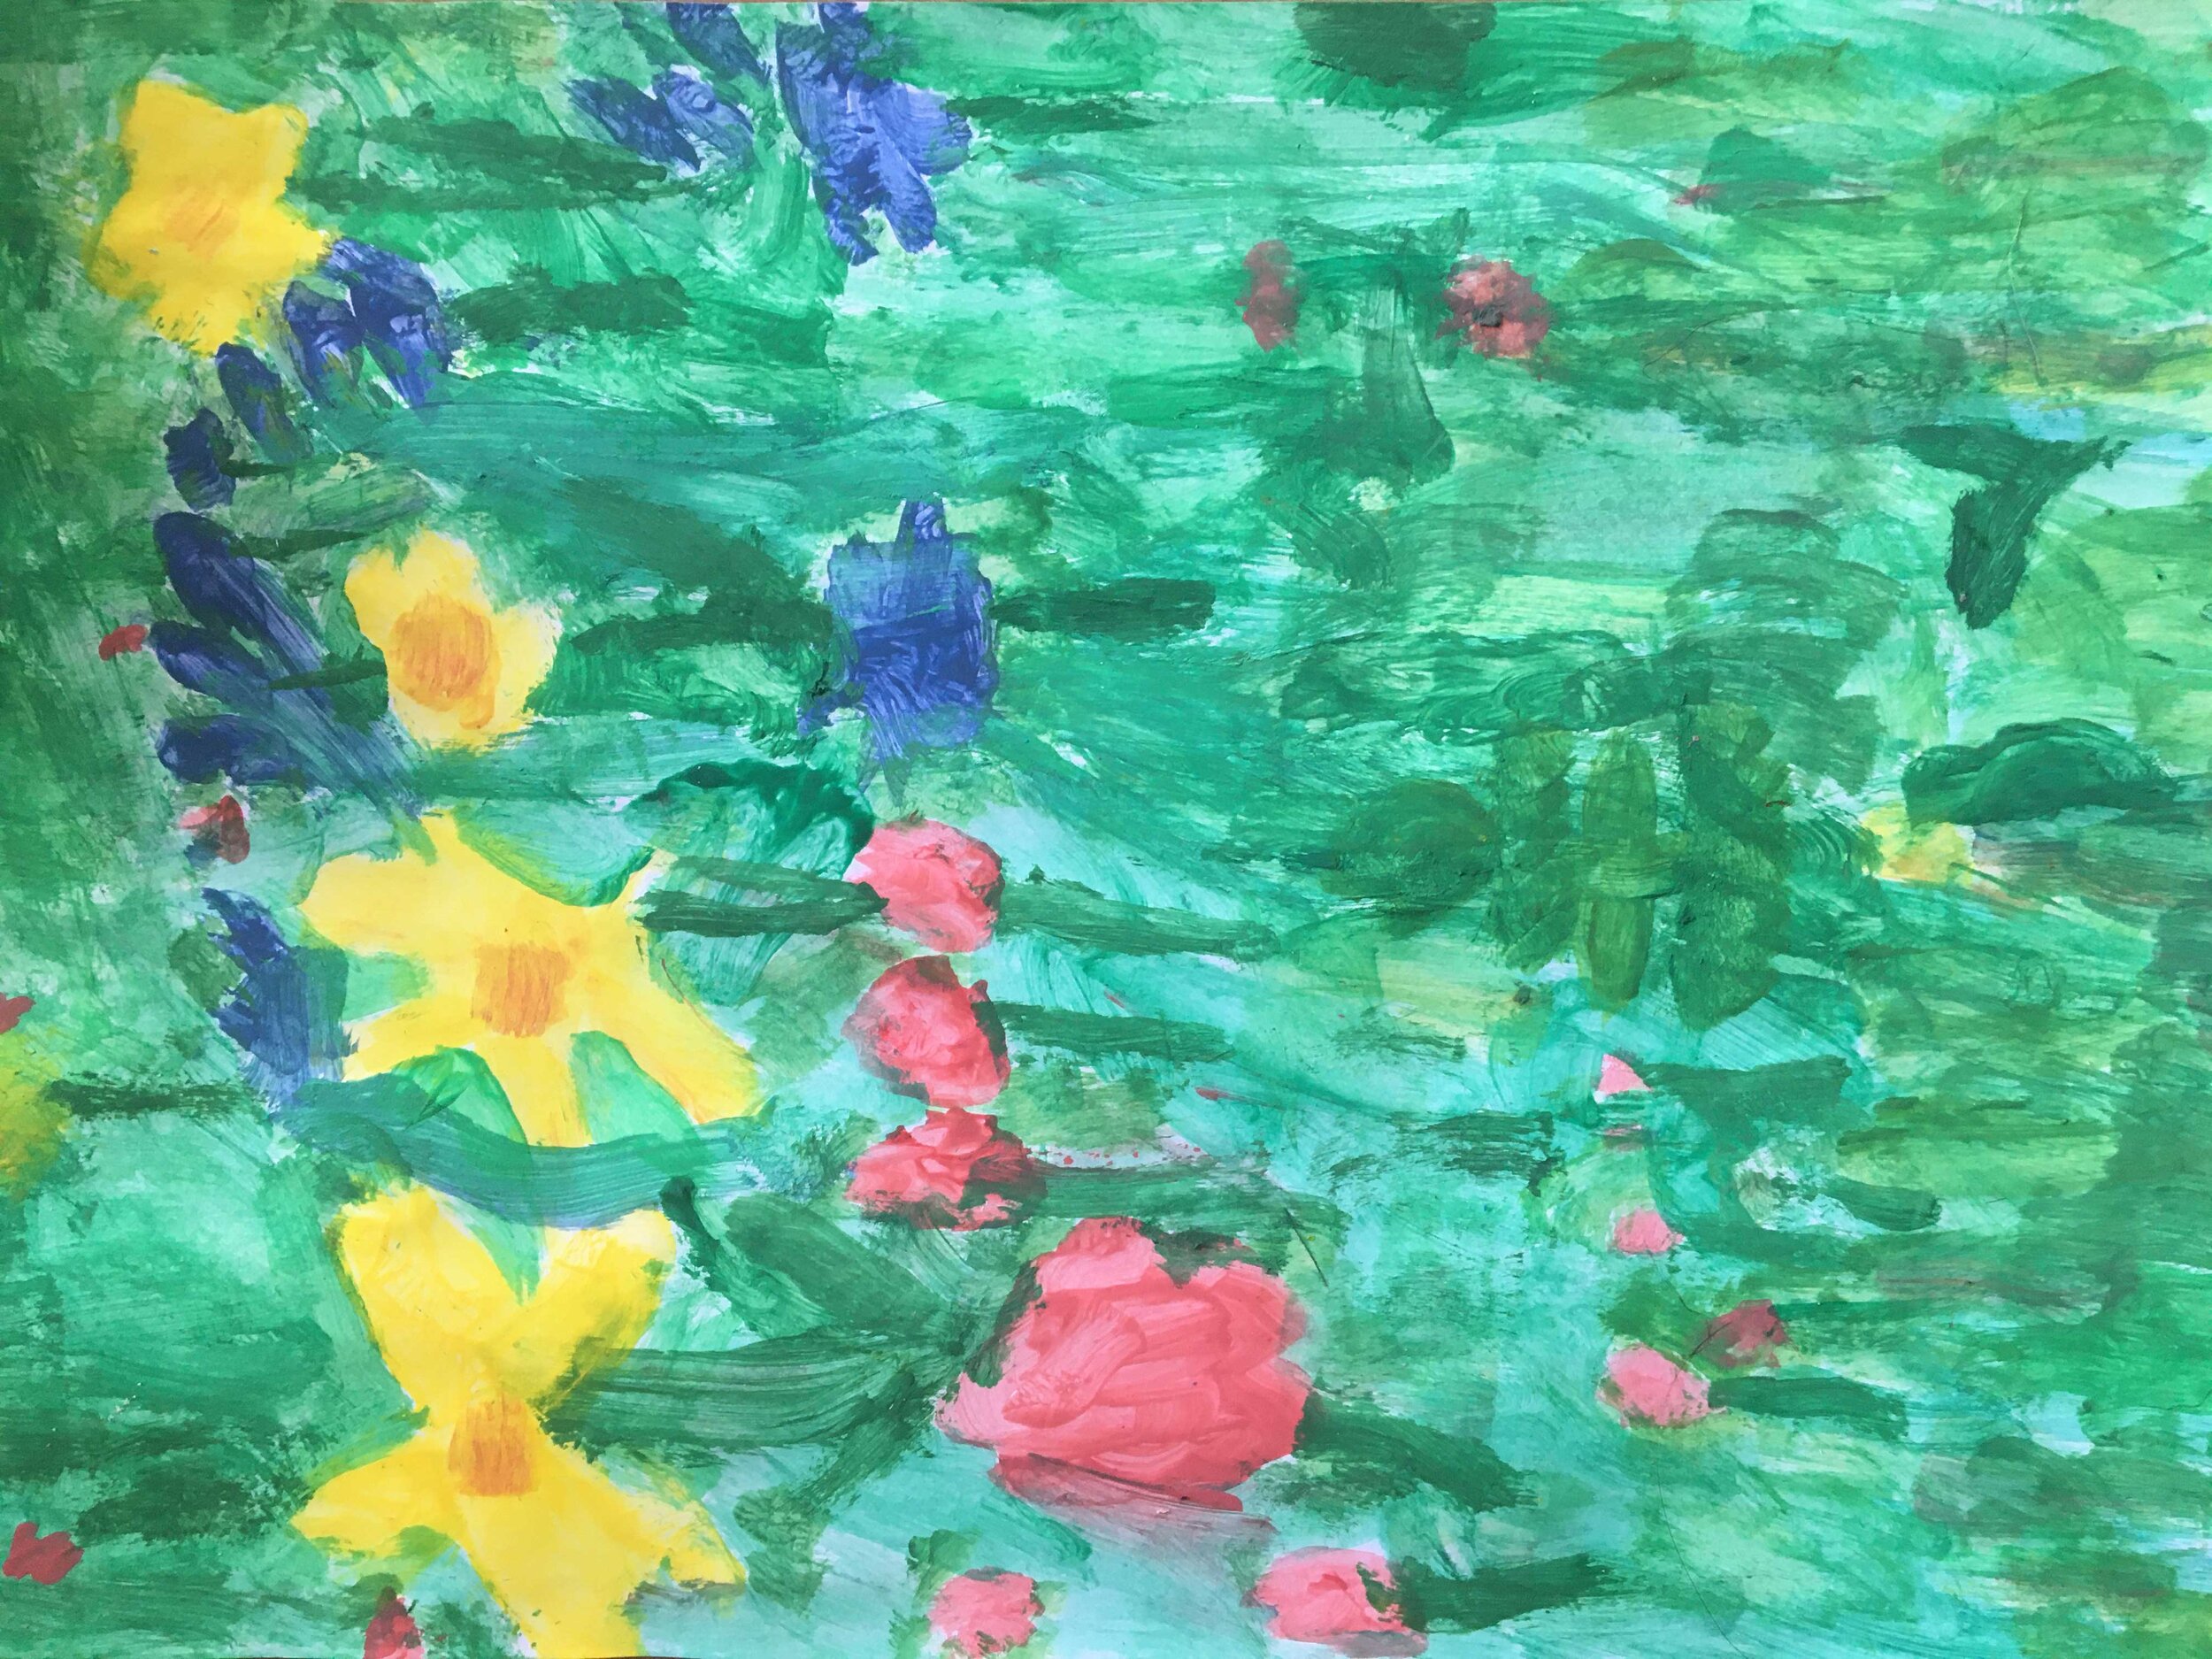 Spring Flowers by Leonie Rendall age 6